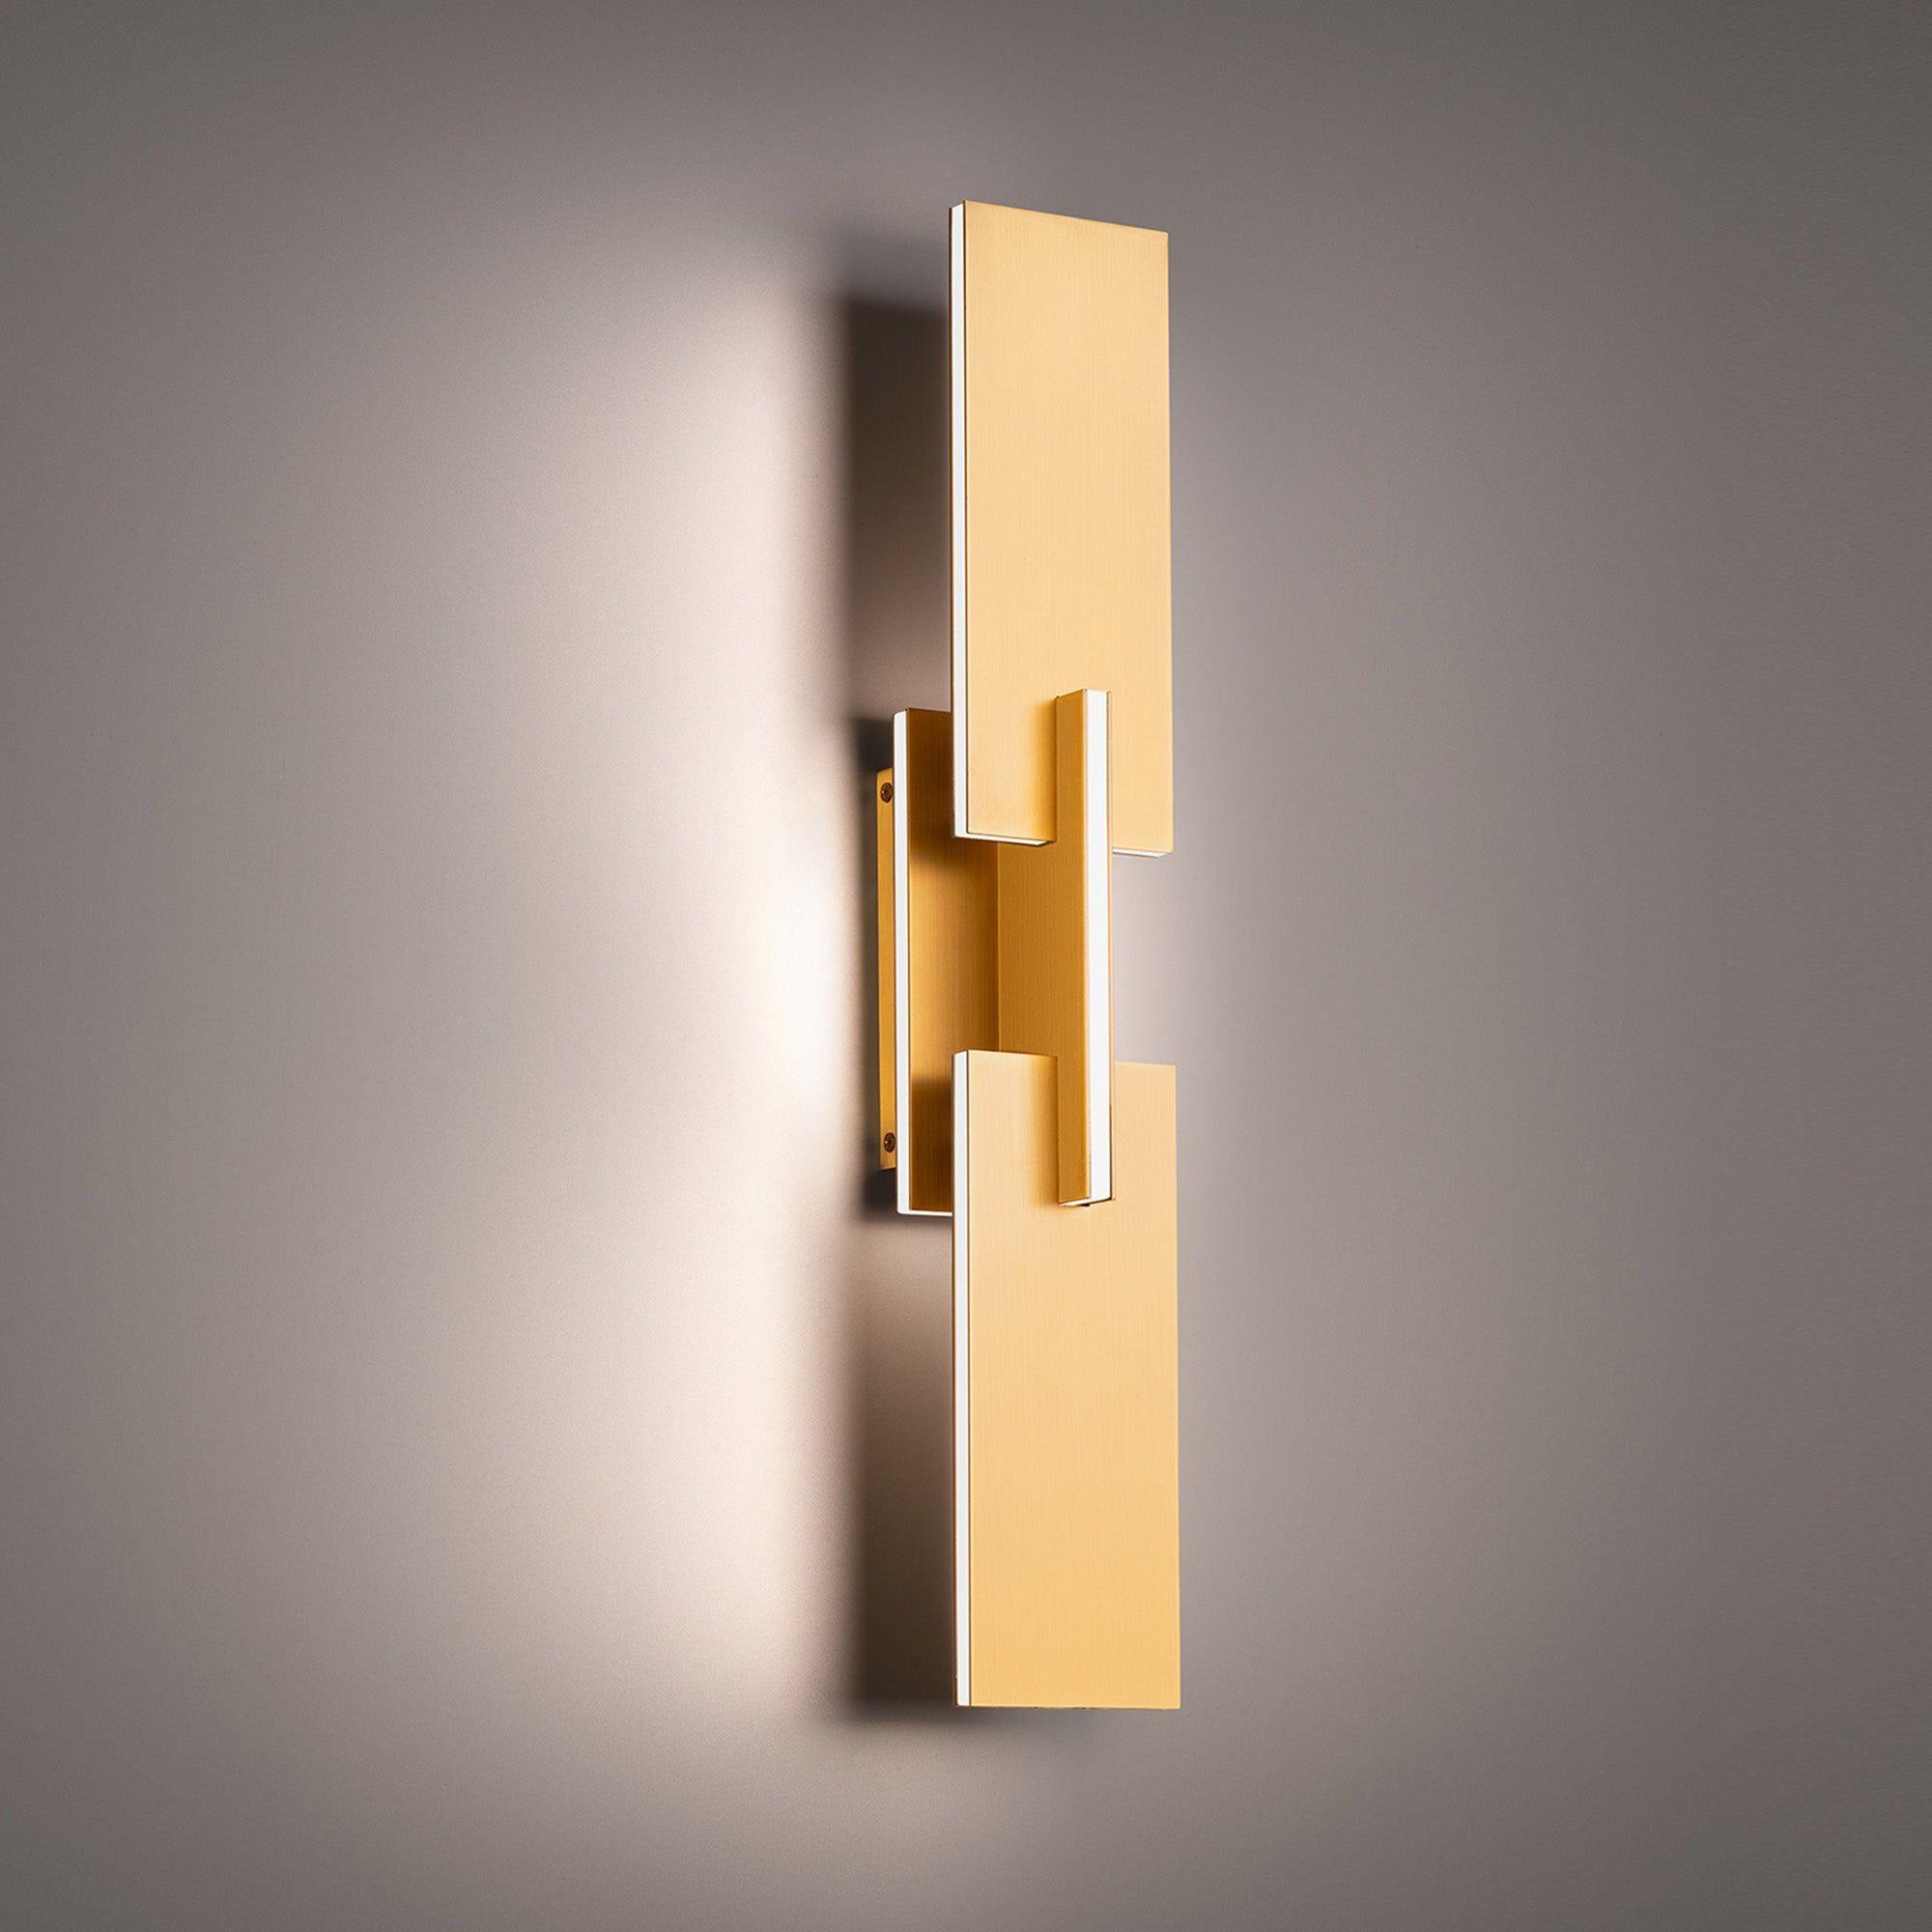 Modern Forms - Amari 22" LED Wall Sconce - Lights Canada